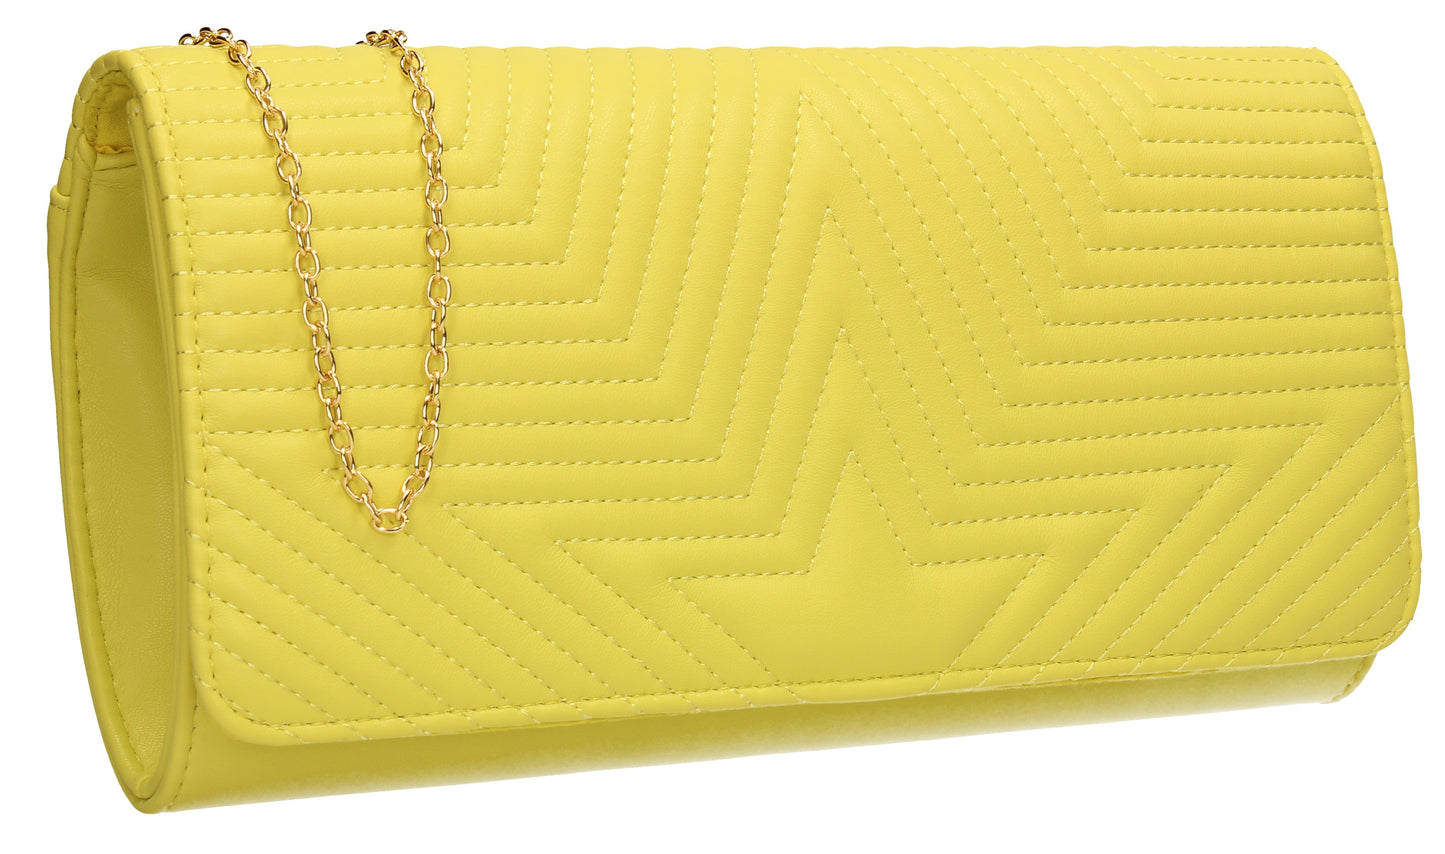 SWANKYSWANS Michelle Clutch Bag Yellow Cute Cheap Clutch Bag For Weddings School and Work